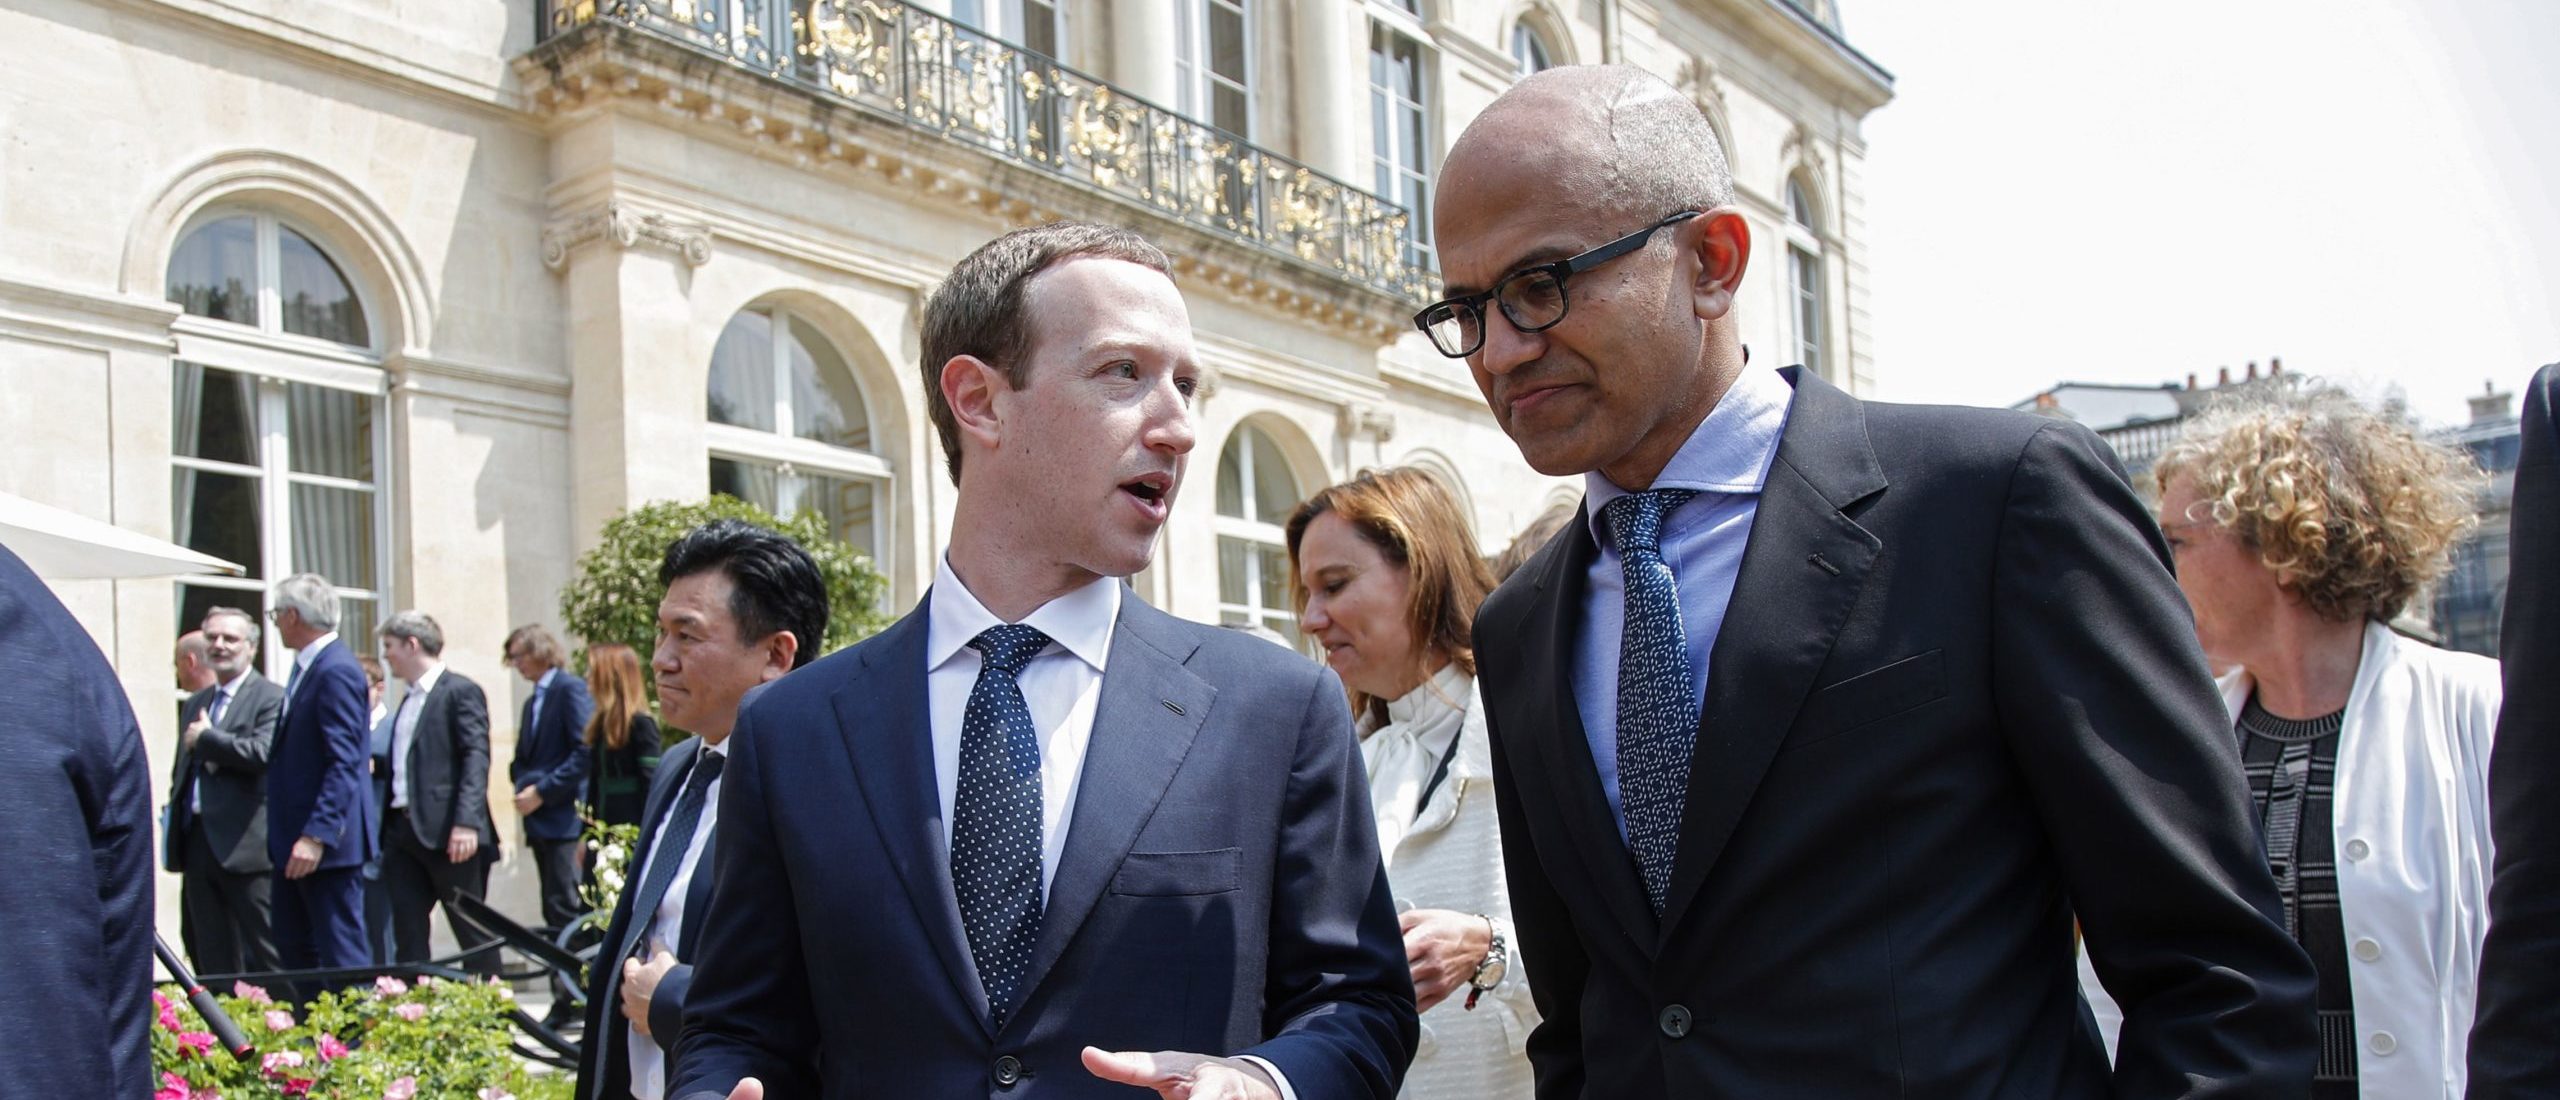 TOPSHOT - Facebook's CEO Mark Zuckerberg (L) speaks with Microsoft's CEO Satya Nadella after posing for a family picture with guests who attend the "Tech for Good" Summit at the Elysee Palace in Paris, on May 23, 2018. (Photo by CHARLES PLATIAU / POOL / AFP) (Photo credit should read CHARLES PLATIAU/AFP via Getty Images)